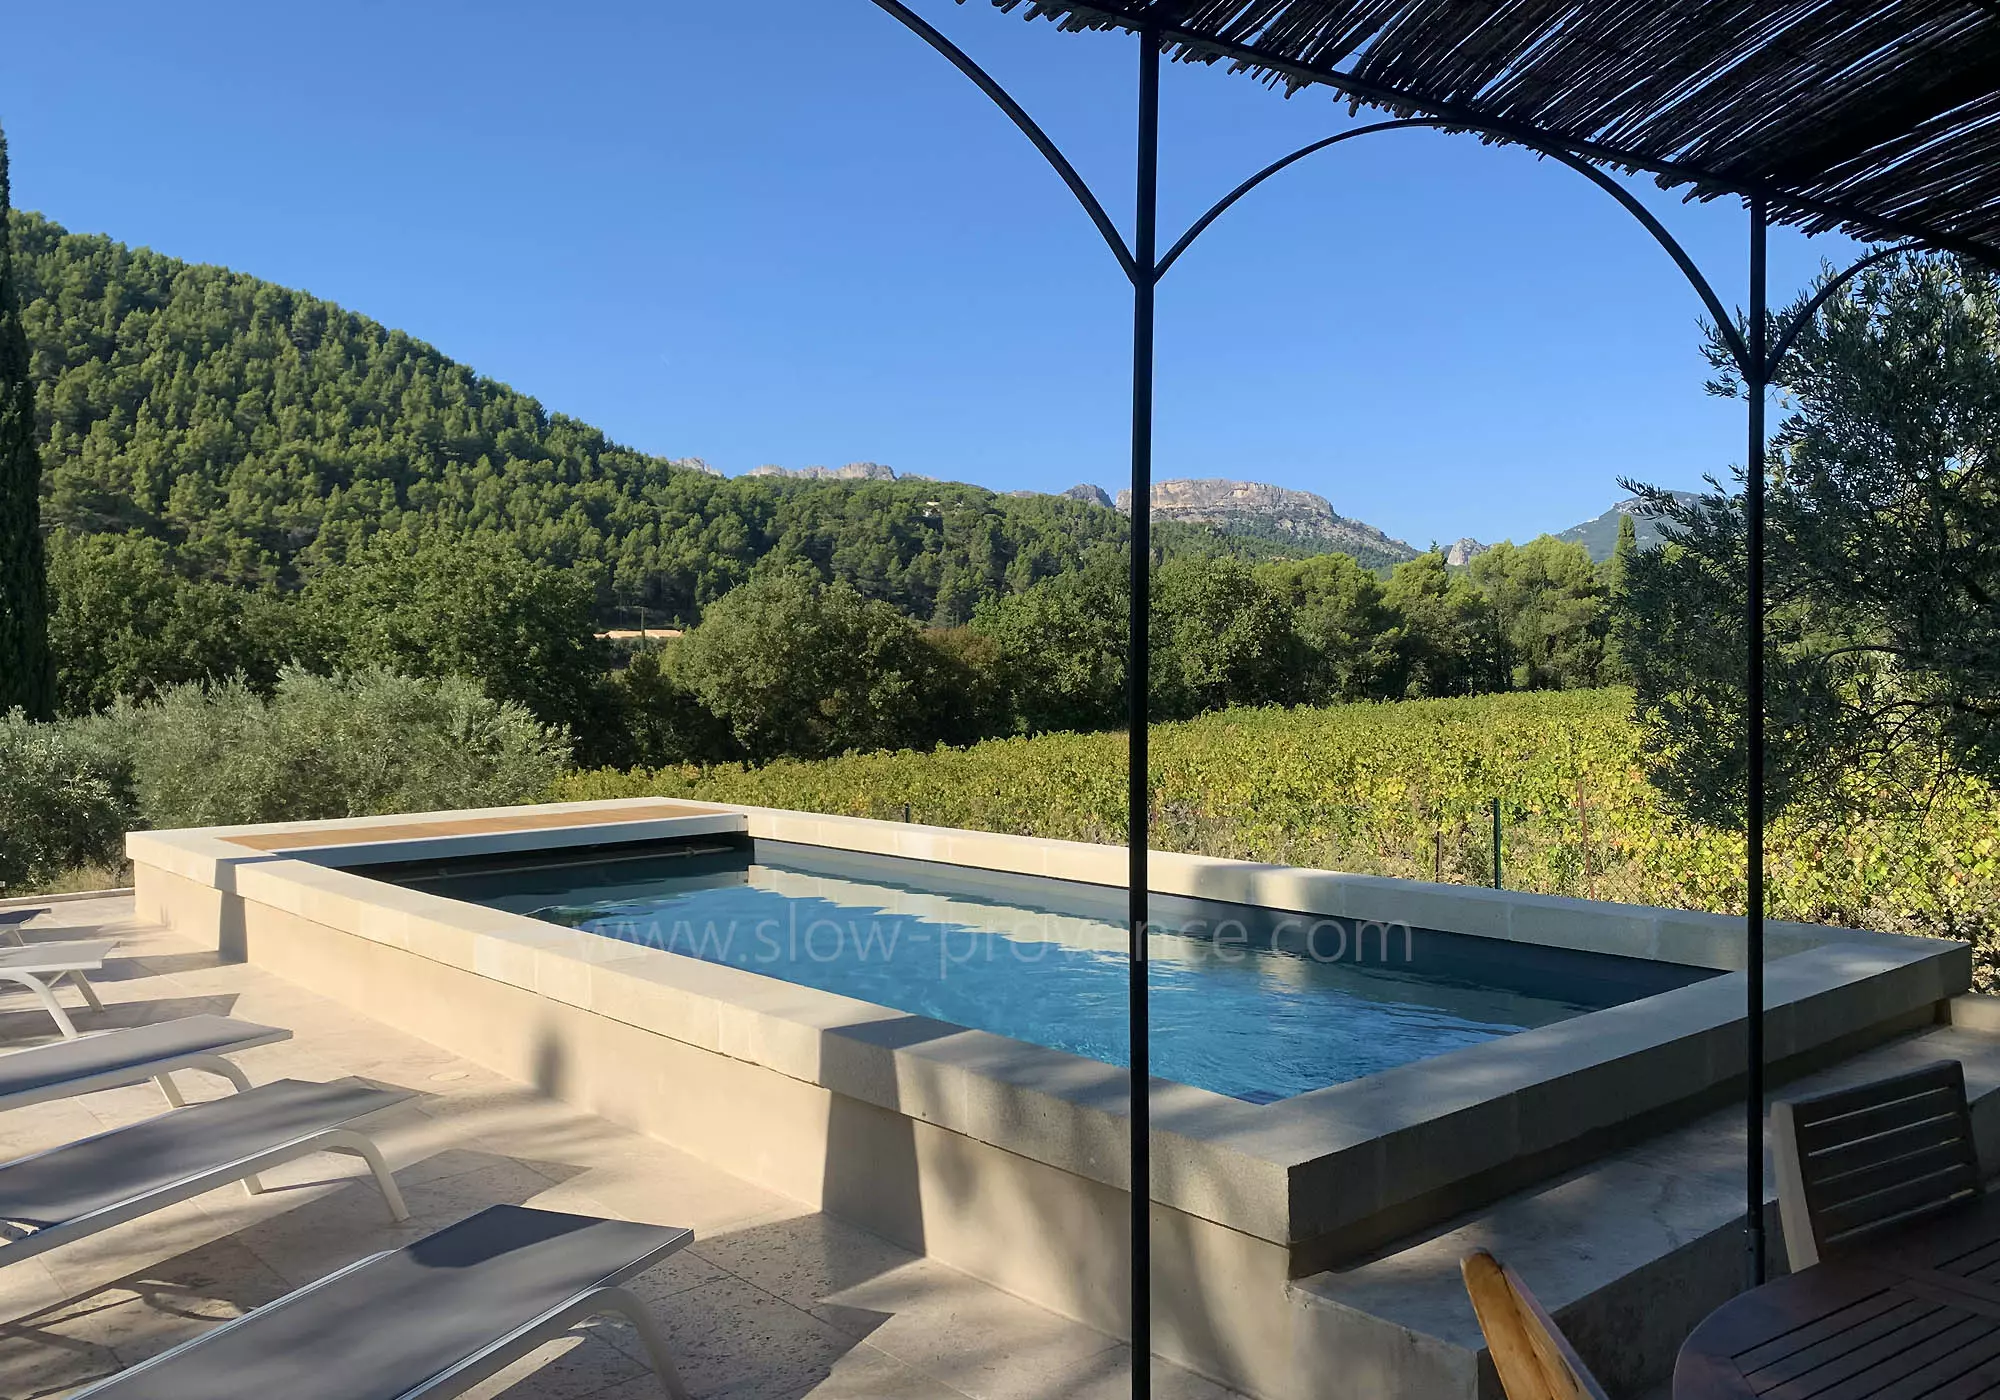 The surrounding vineyards and mountain views